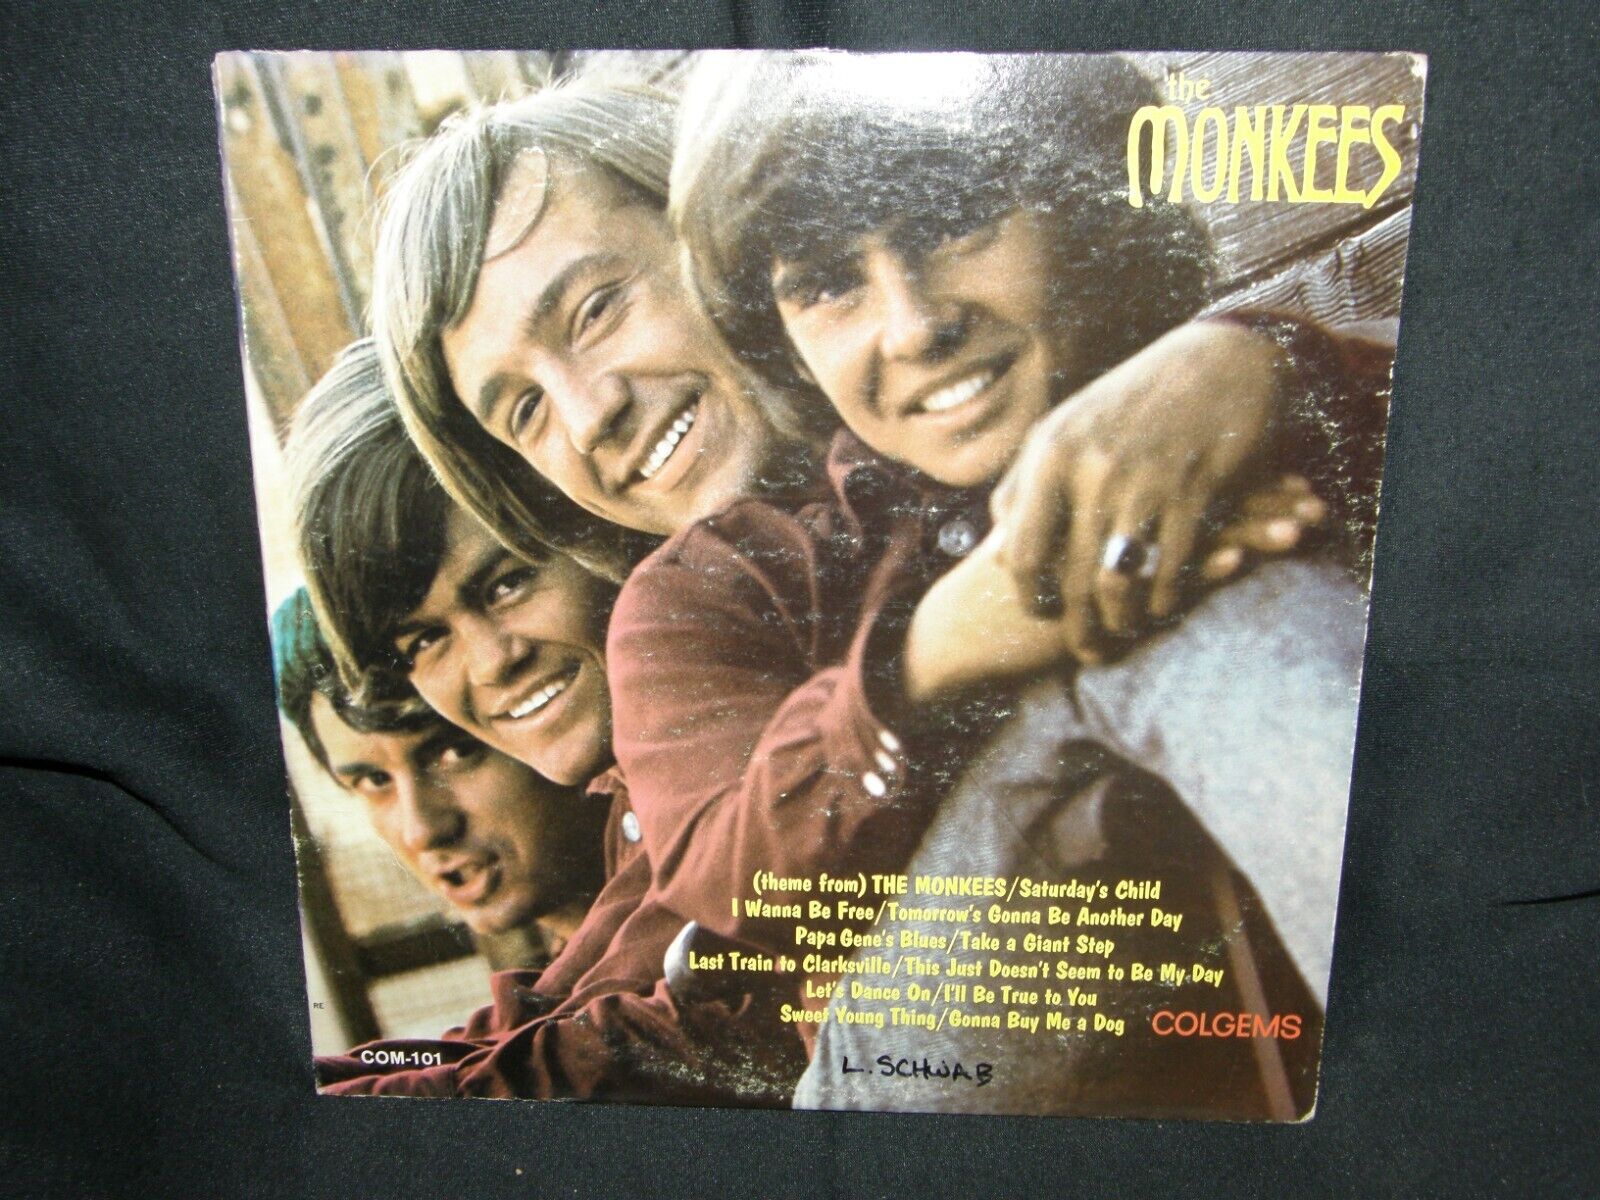 THE MONKEES 1966 COLGEMS RECORDS COM-101